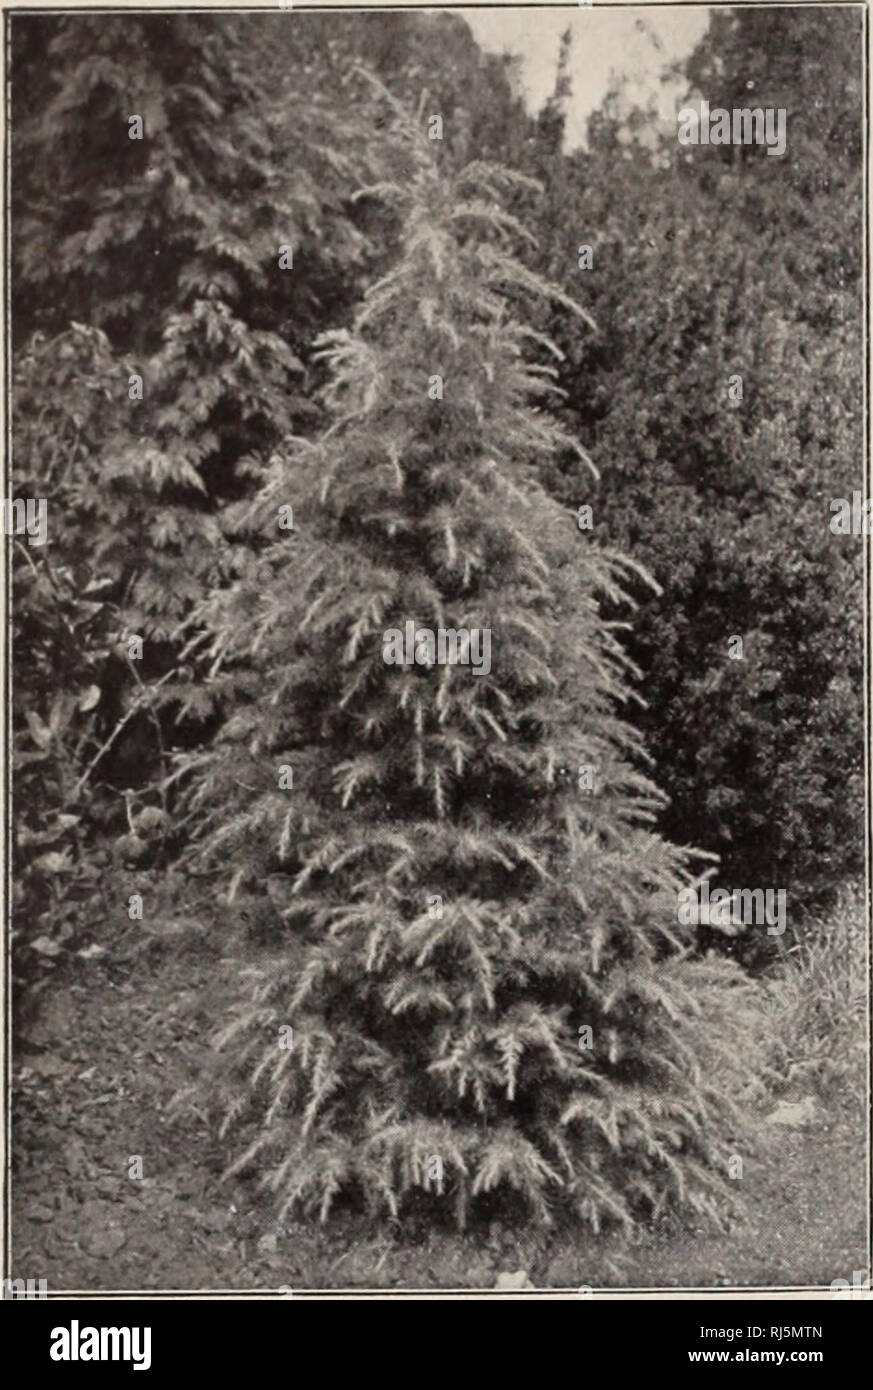 . Choice hardy trees and plants / F.W. Kelsey Nursery Company.. Nursery Catalogue. 22 FREDERICK W. KELSEY.. CEDRUS DEOUORA. INDIAN CEUAR. BIOTA semper aurescens. Ever-Golden Ar- BOR-ViT.iE (IV). Dense conical habit. 75 cts. CEDRUS Atlantica. Mr. Atlas Cedar (I). Of vigorous growth, pyramidal form; dense, light silvery foliage, very thick on the upper side of the branches. Hardy and valuable. One of the finest evergreens. $1 to $2. Extra speci- mens, $5 to $20. CEDRUS Atlantica glauca. (I). One of the most beautiful evergreens. Upright growth, low branched and of compact habit. Leaves very fine Stock Photo